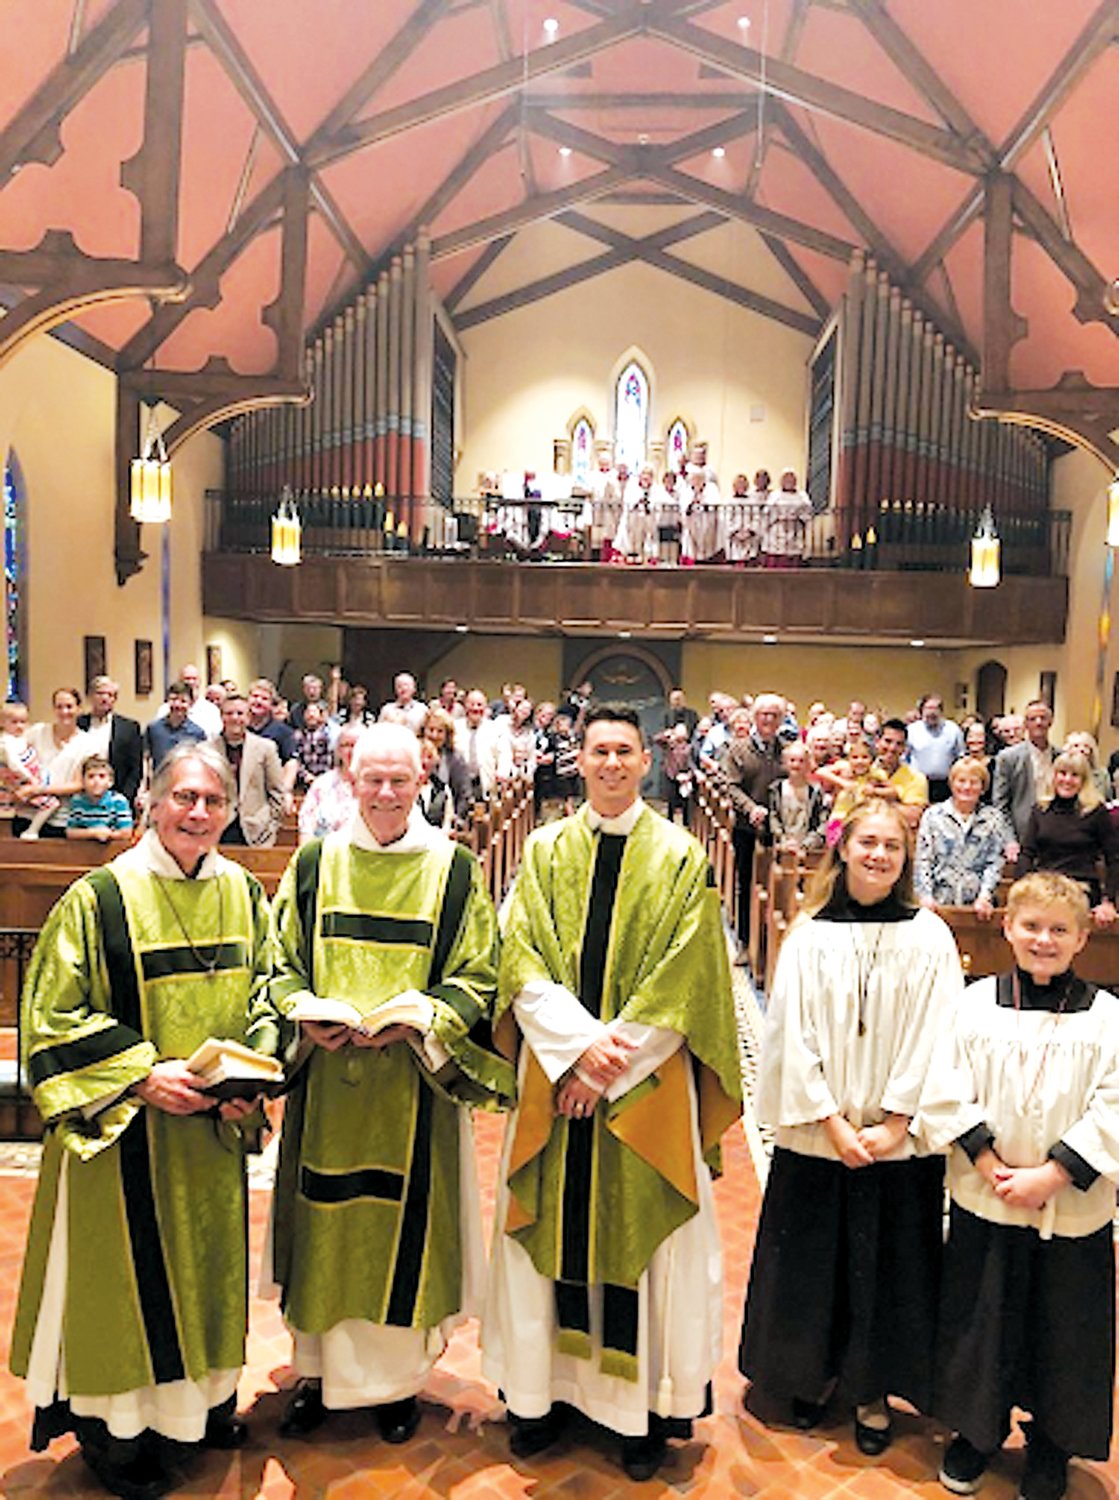 The choir is high in the loft in this photo of a service at St. Paul’s Episcopal Church,which will mark its 175th anniversary April 22 and 23.